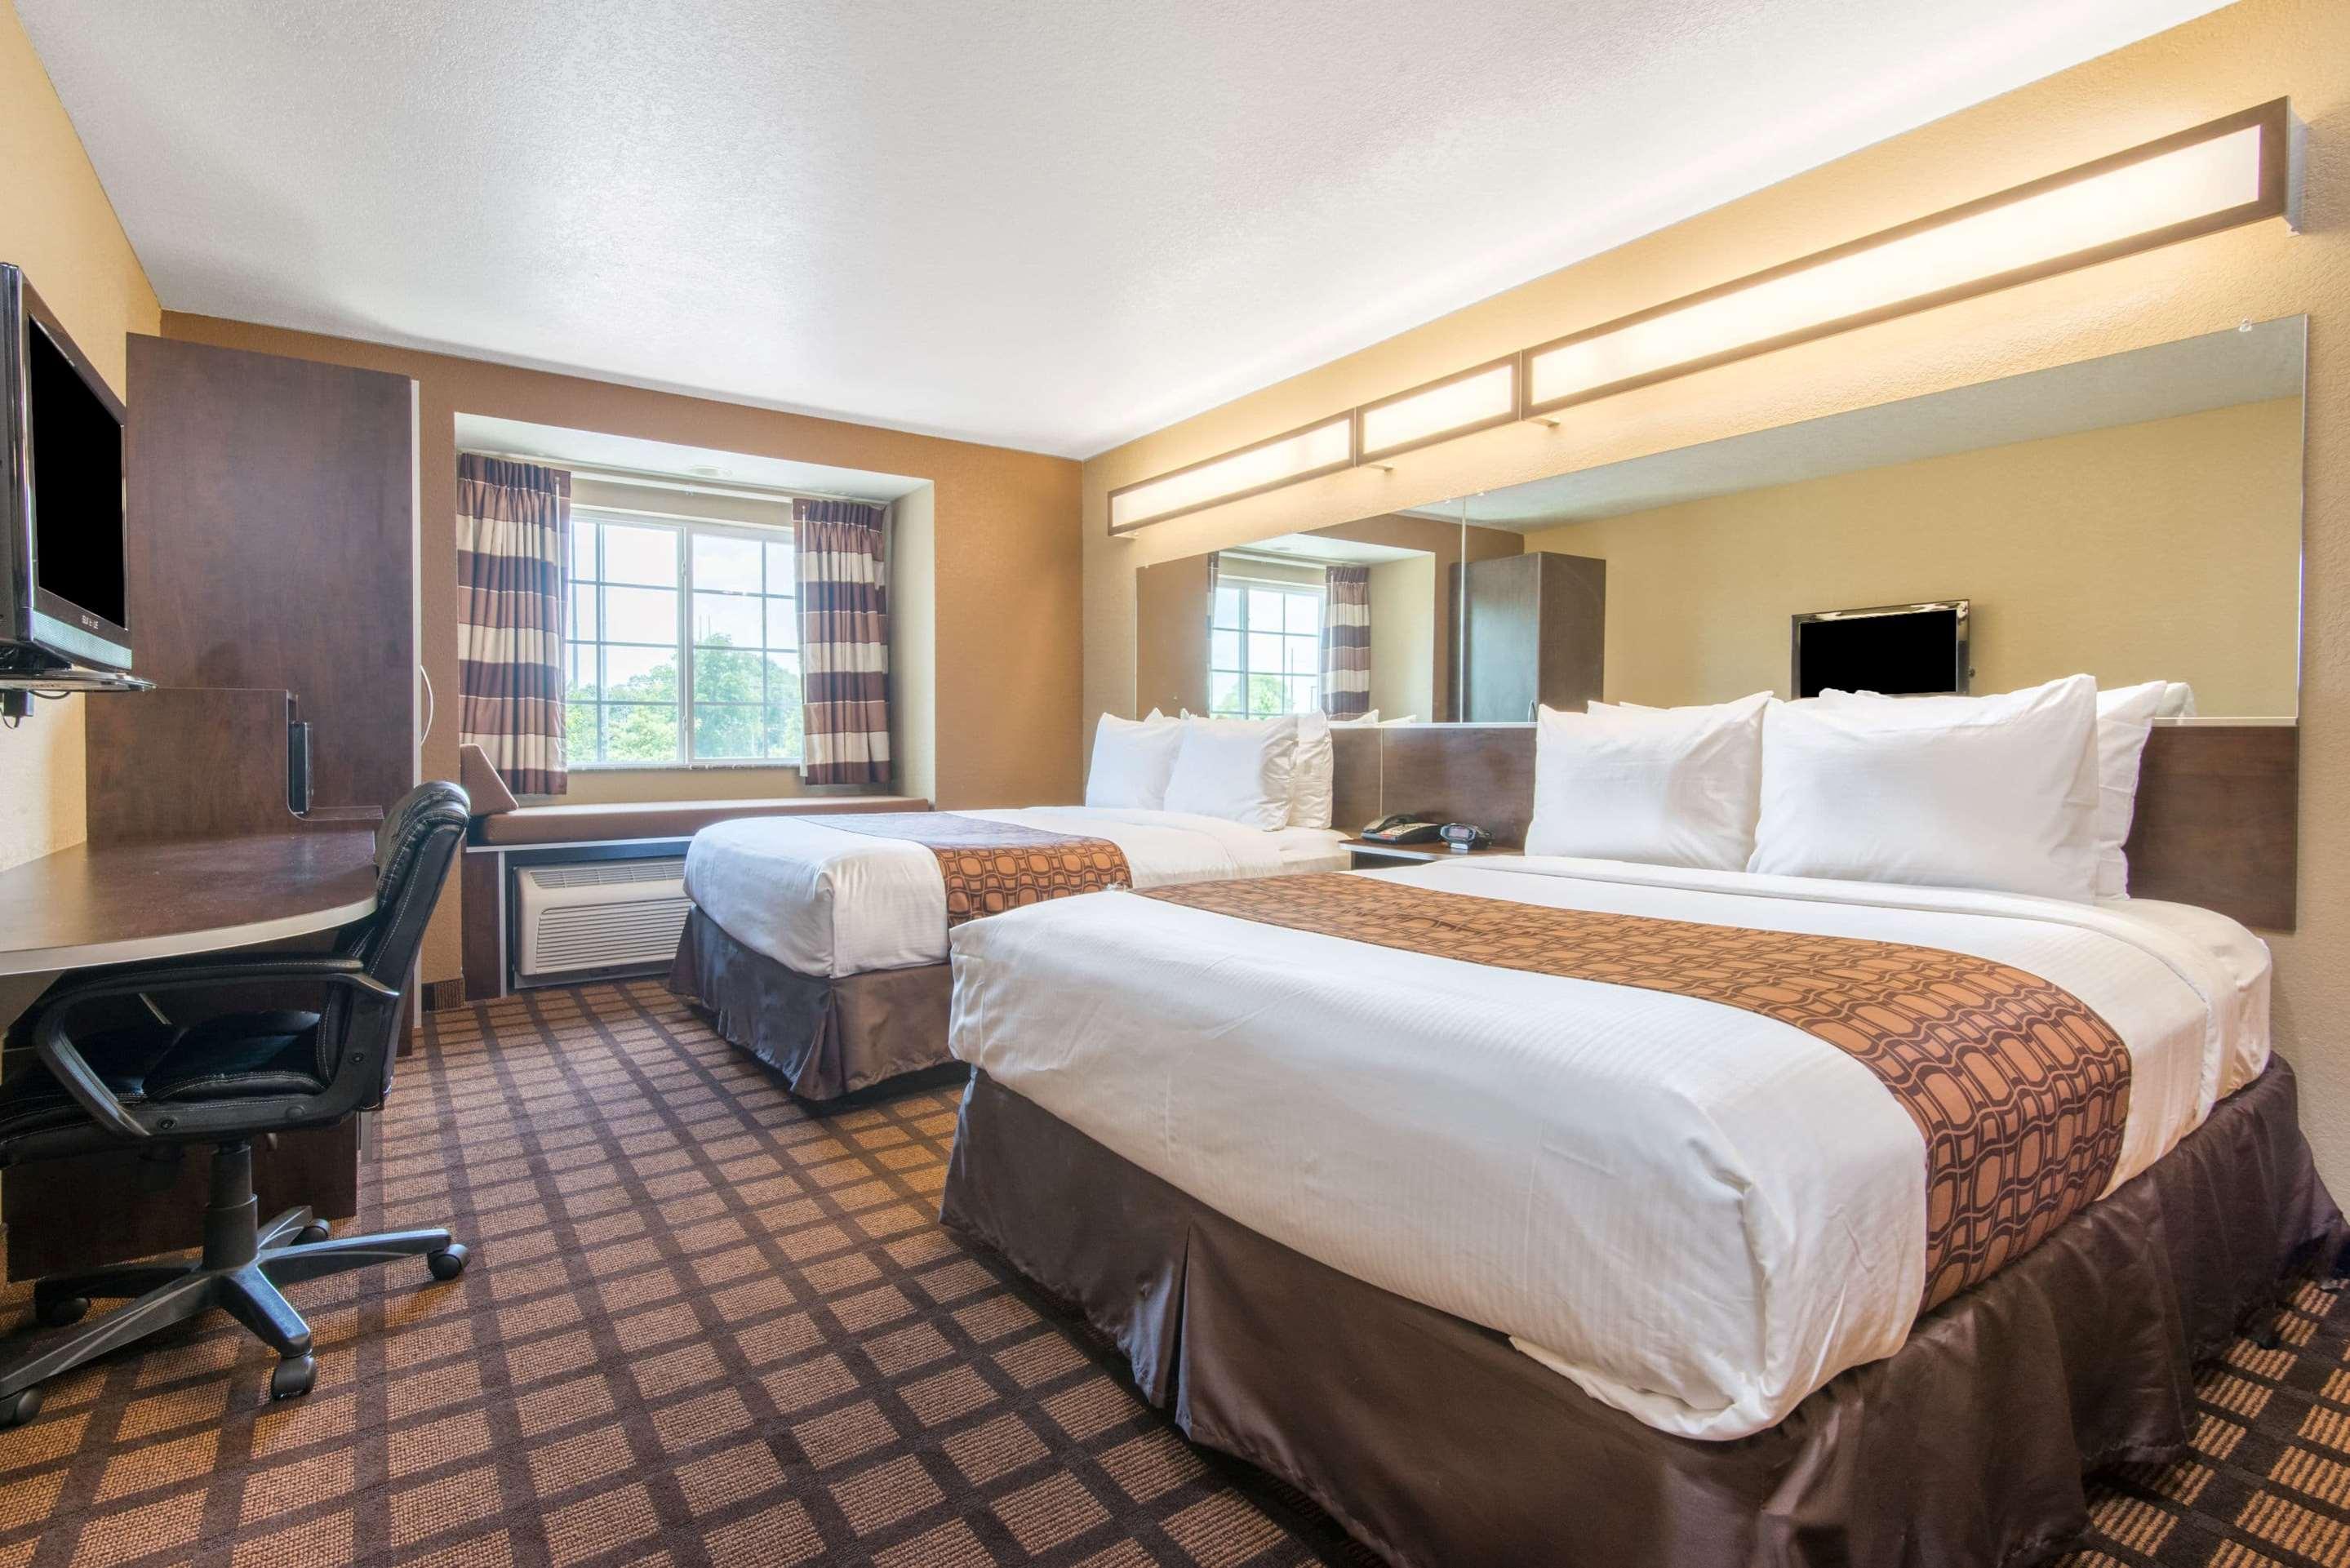 Microtel Inn & Suites by Wyndham Ames- Tourist Class Ames, IA Hotels- GDS  Reservation Codes: Travel Weekly